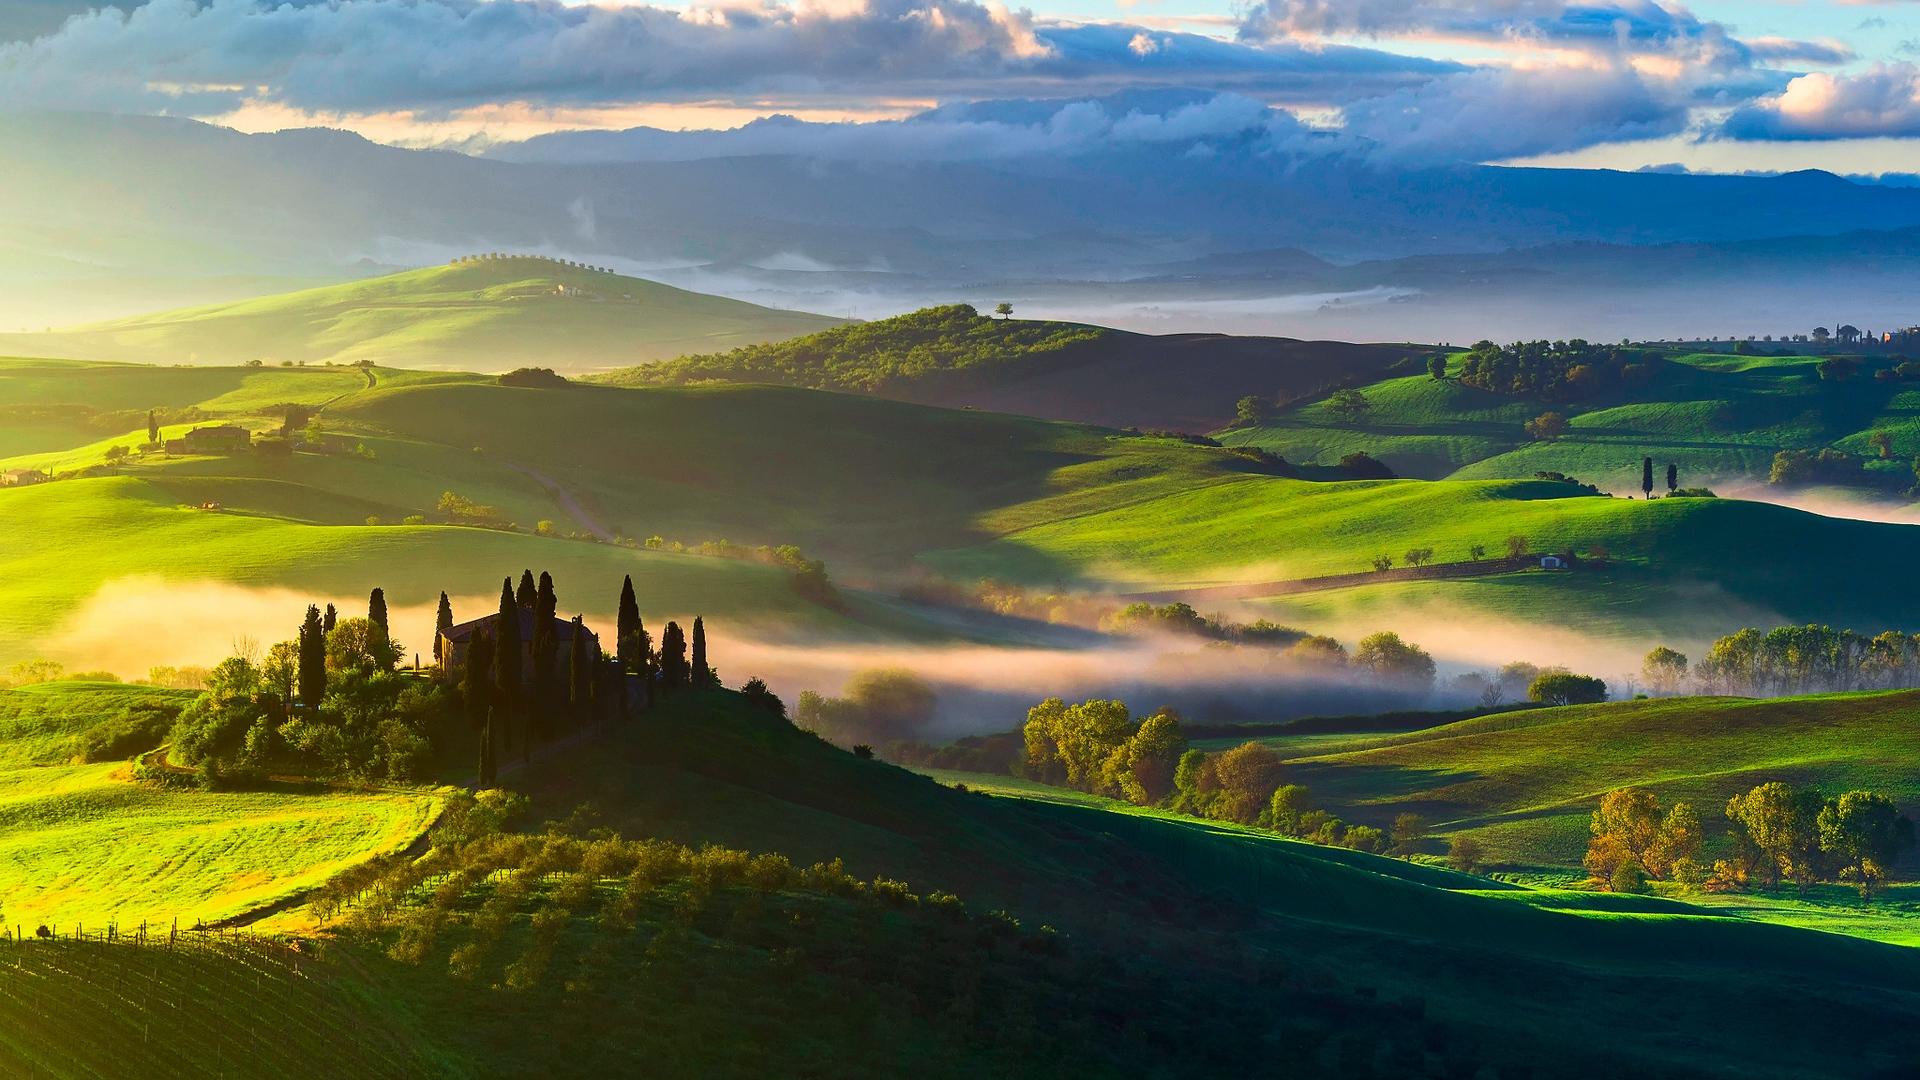 Download wallpaper 1920x1080 italy, tuscany, fields, trees, top